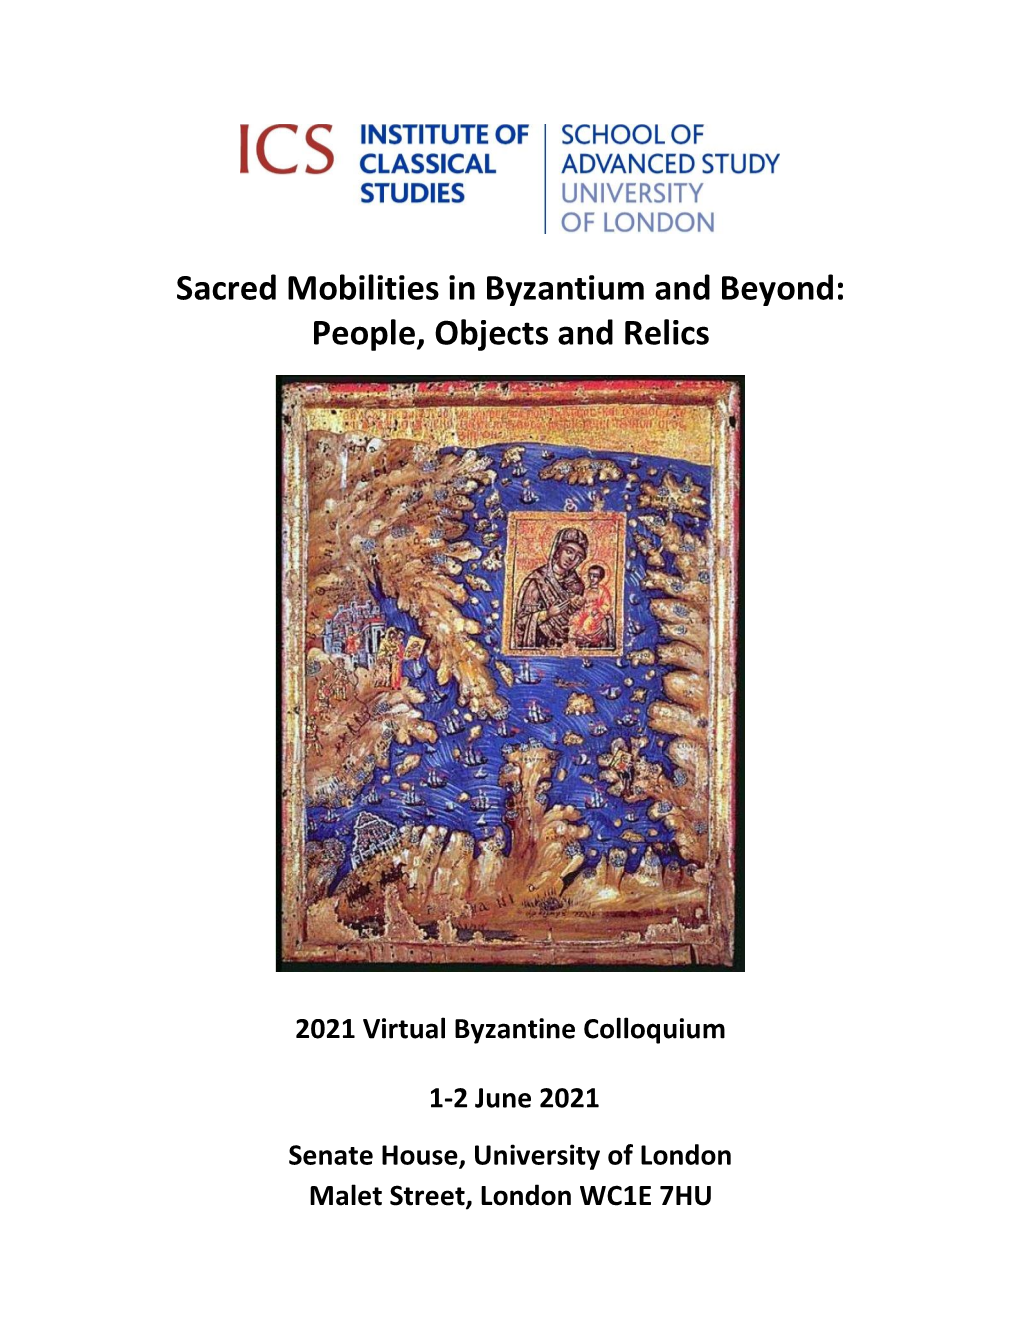 Sacred Mobilities in Byzantium and Beyond: People, Objects and Relics